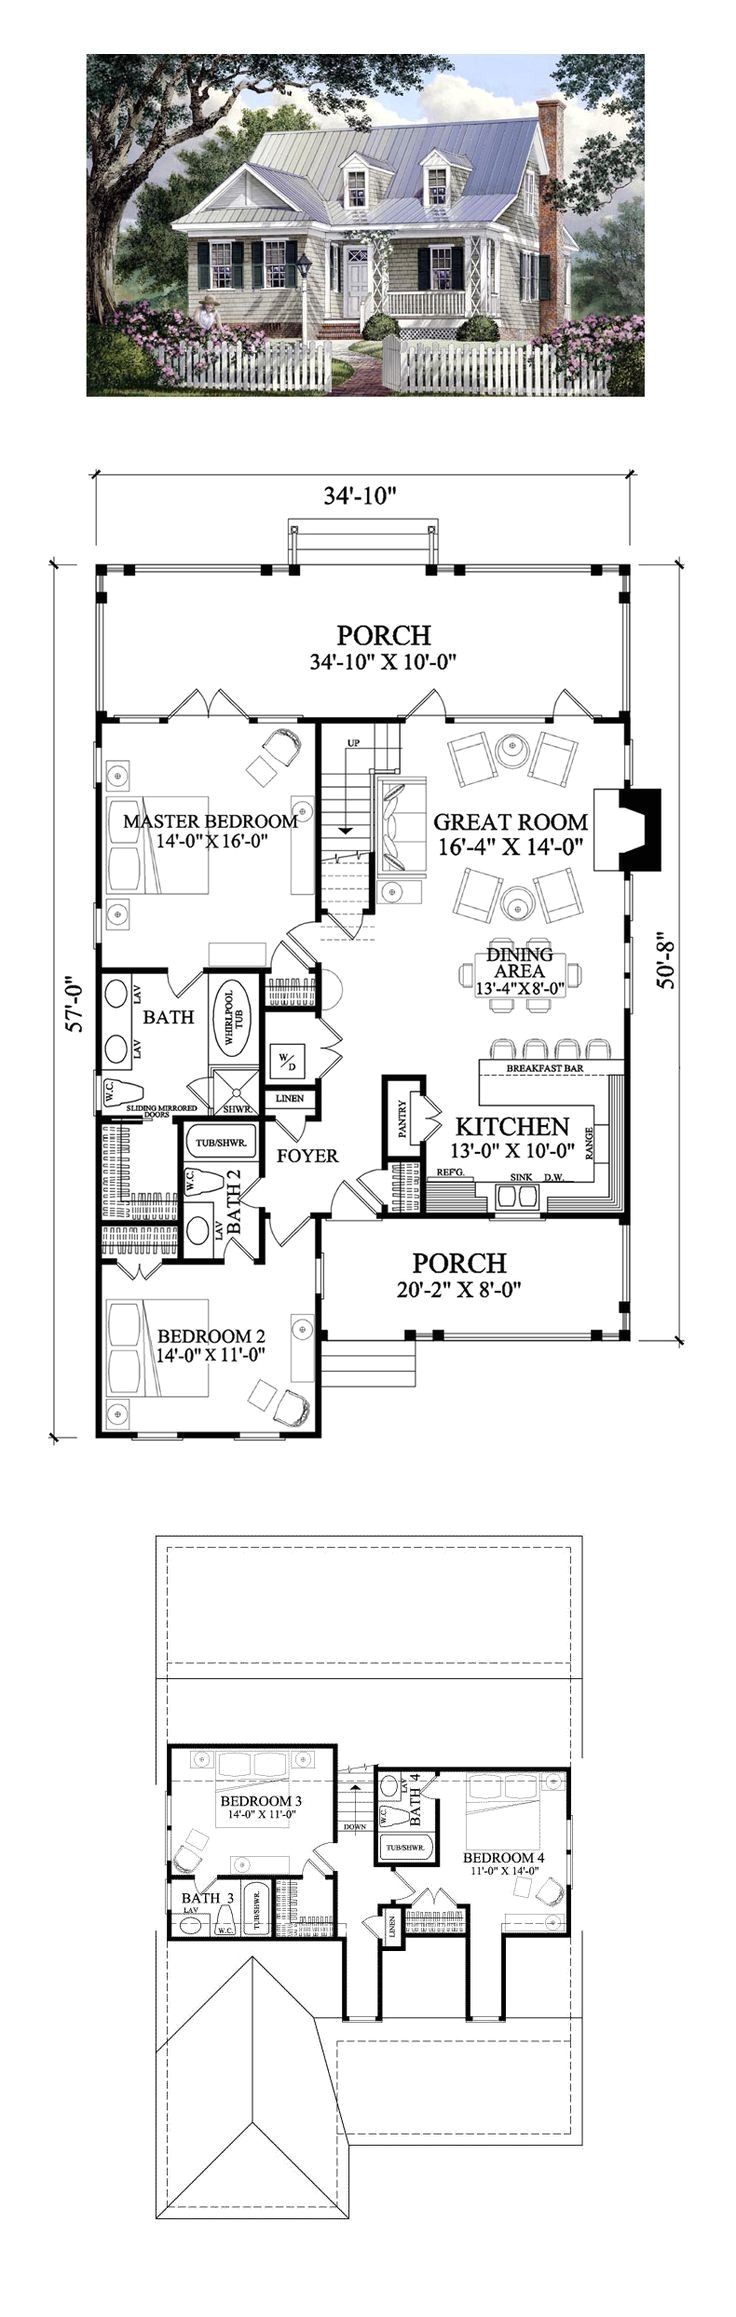 how do you find floor plans on an existing home elegant draw house plans free best free floor plan free floor plans